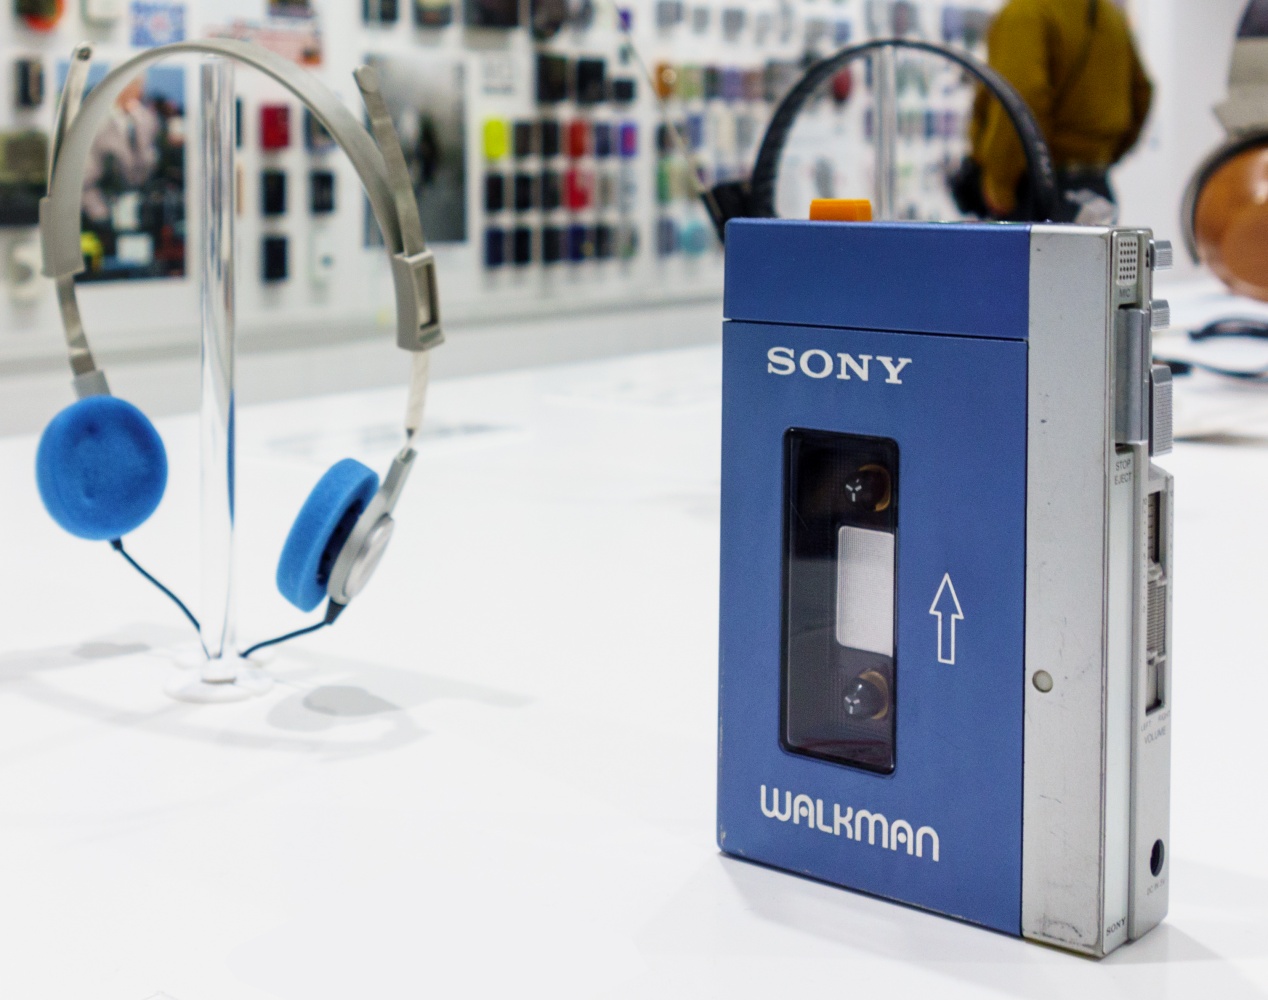 Smithsonian Collections Object: The Sony TPS-L2 “Walkman” Cassette Player,  National Museum of American History